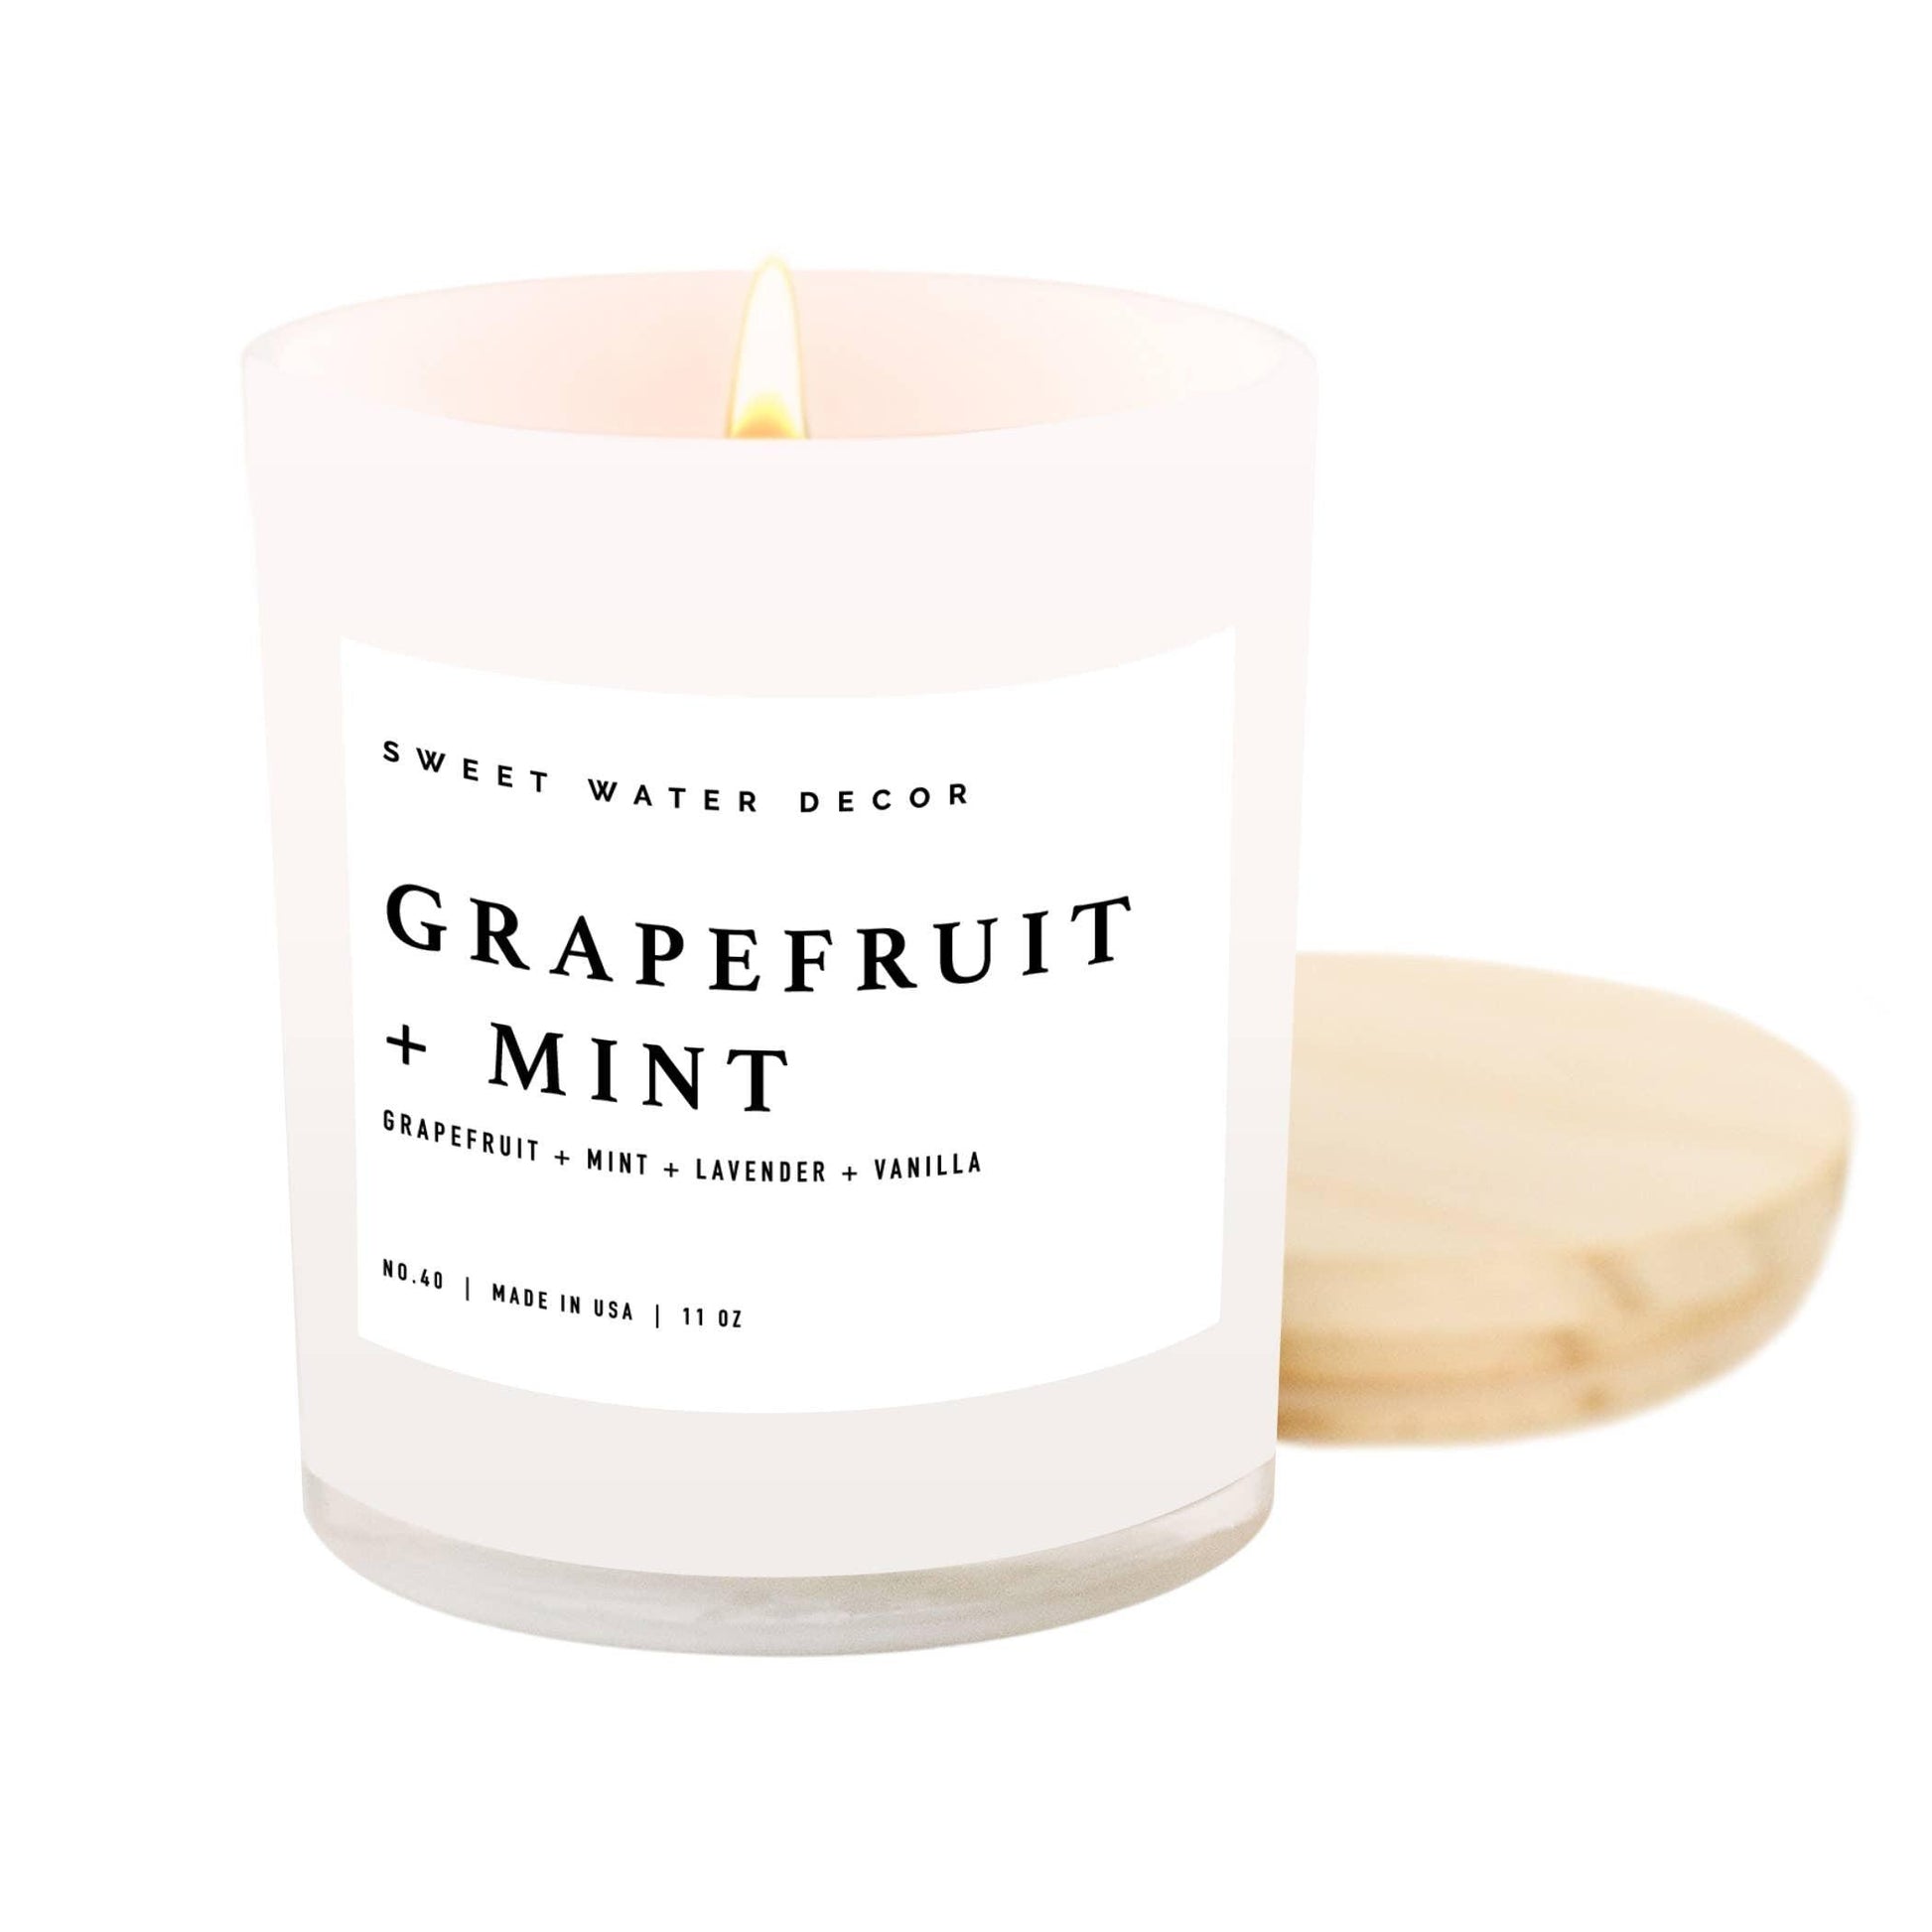 Grapefruit and Mint Soy Candle - White Jar - 11 oz - The Silver Dahlia